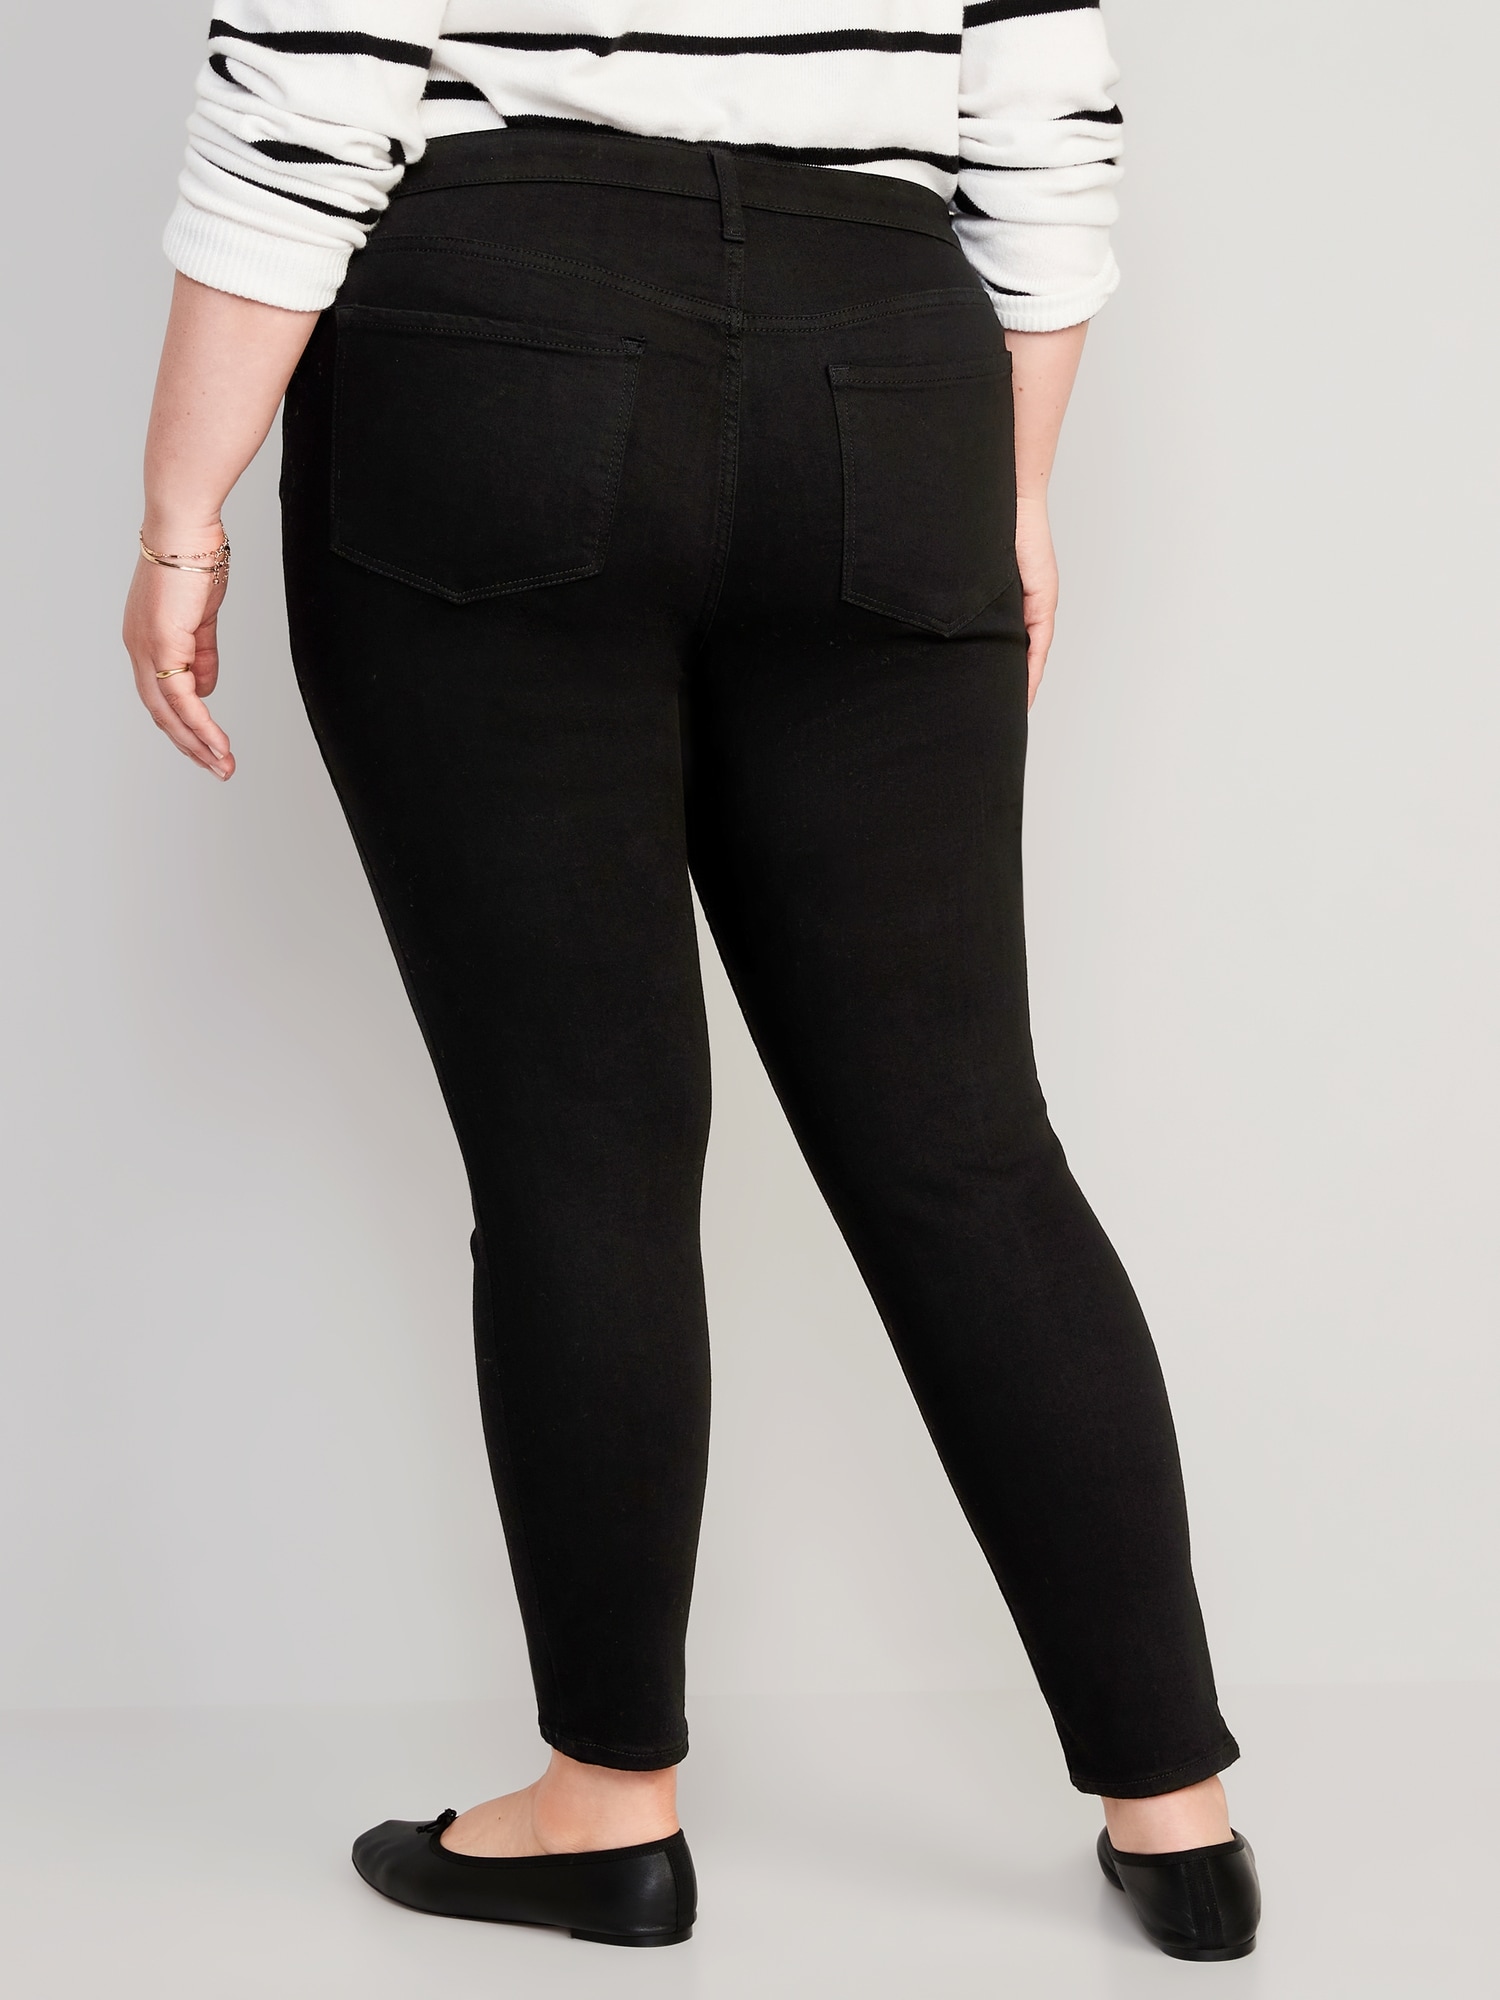 I Finally Found the Perfect Pair of Black Pants - Repeller